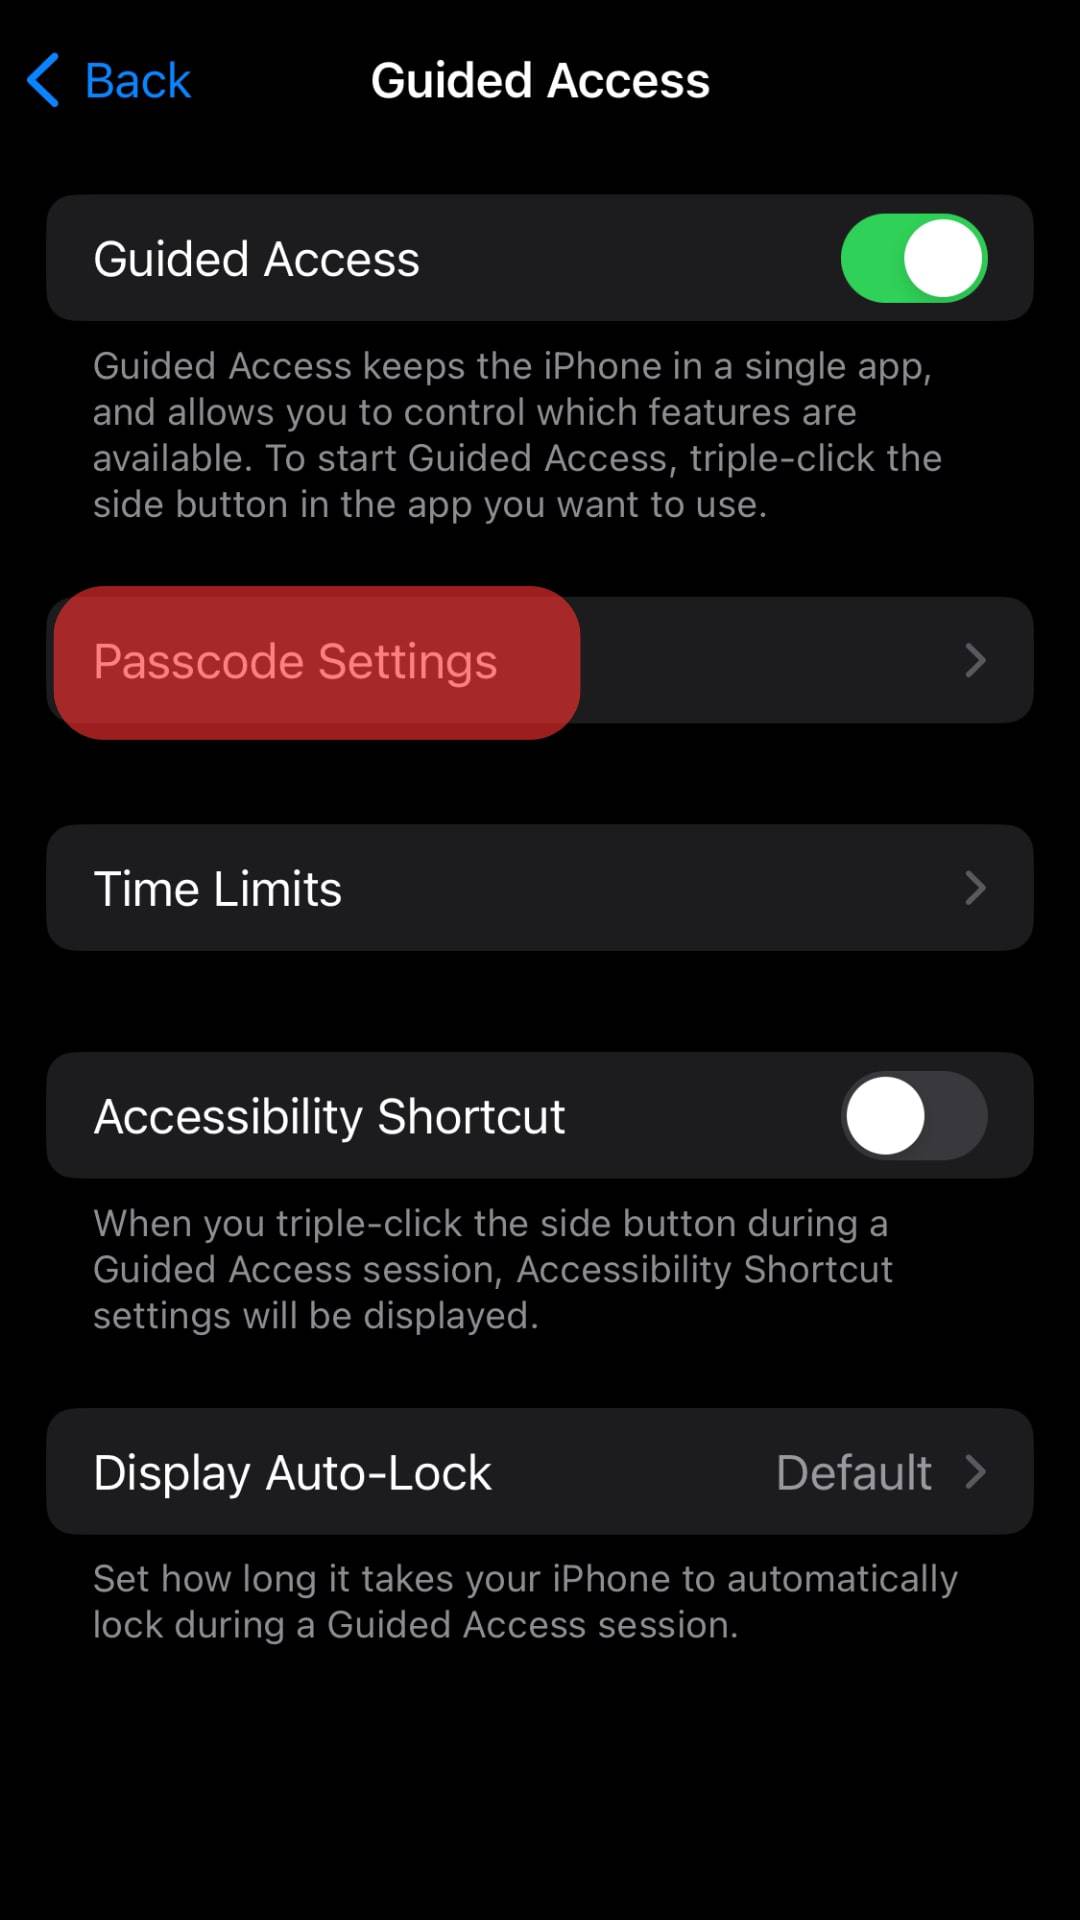 Tap The Option For Passcode Settings.